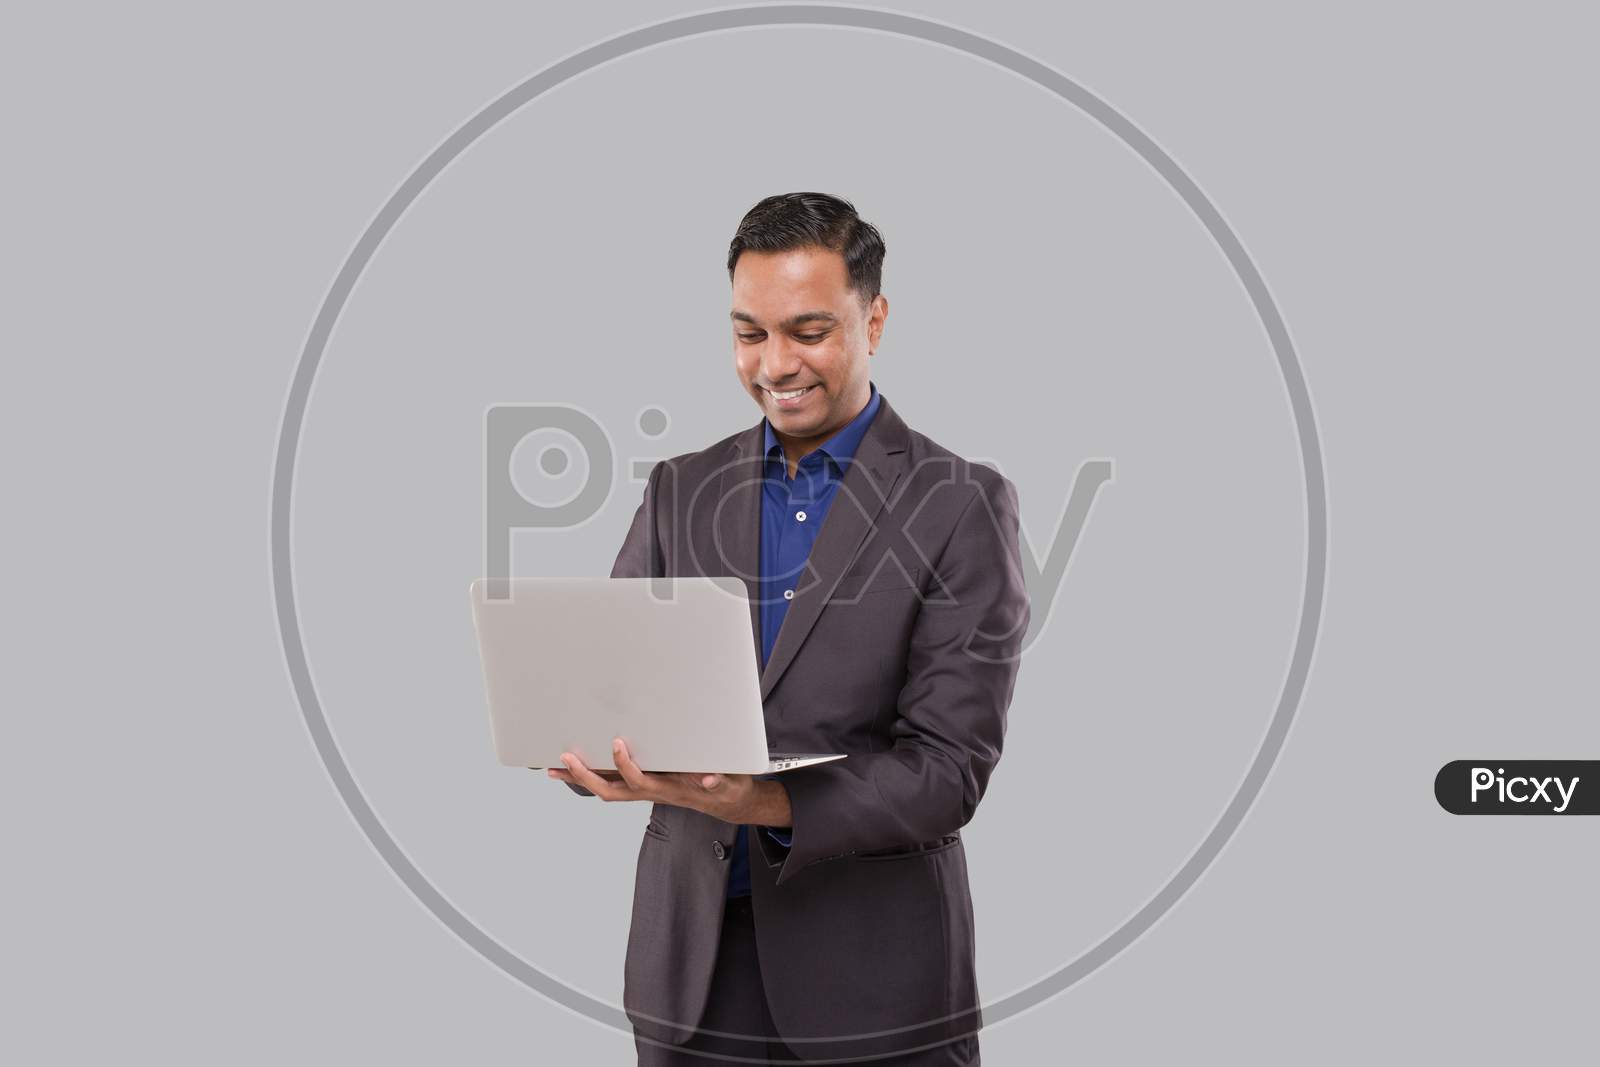 Businessman Using Laptop Green Screen Isolated. Indian Business Man With Laptop In Hands. Online Business Concept